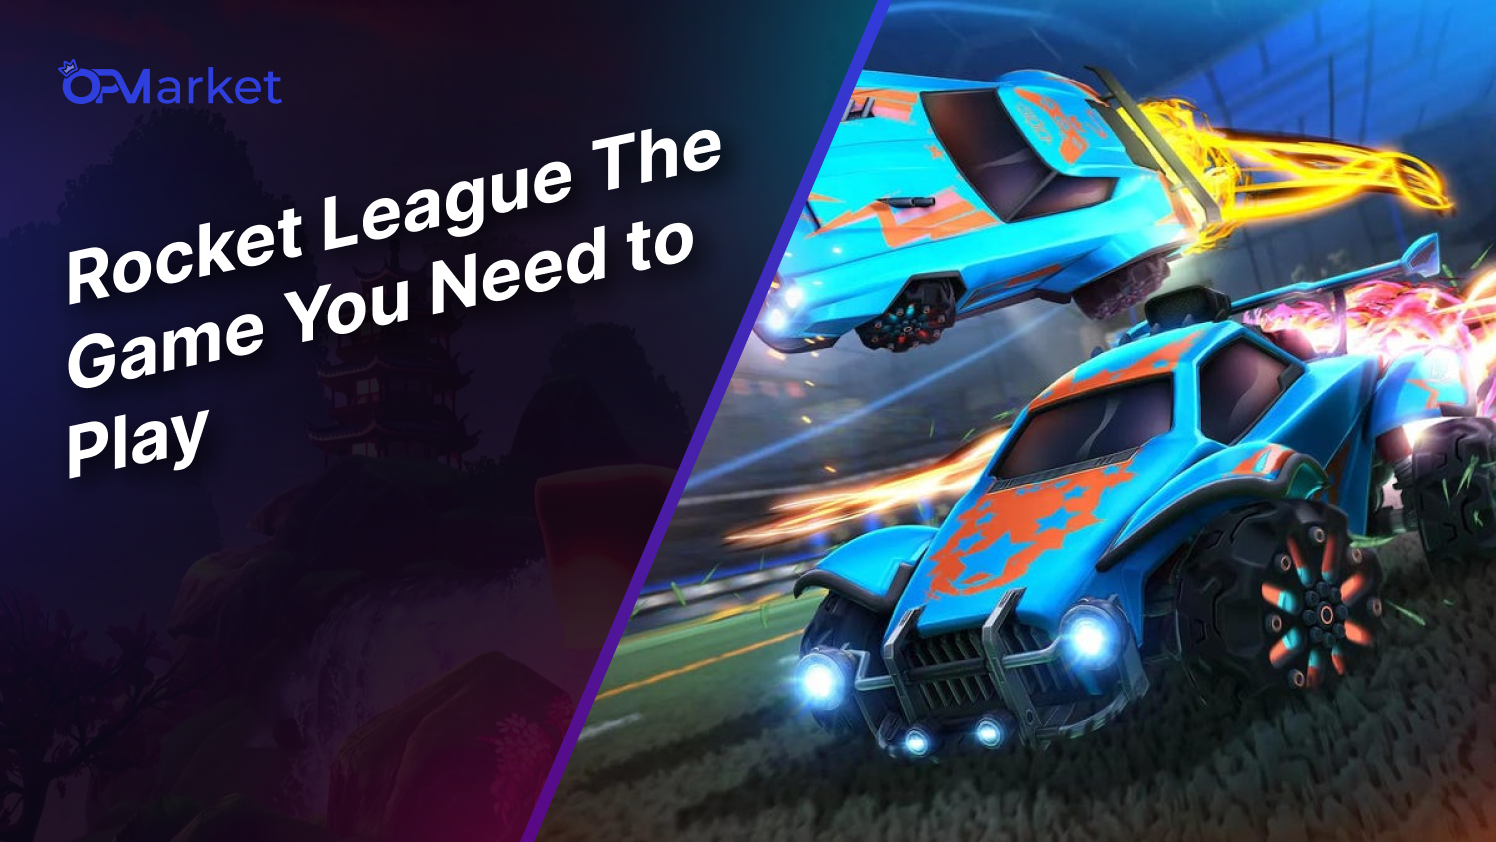 Rocket League: The Cross-Platform Game You Need to Play